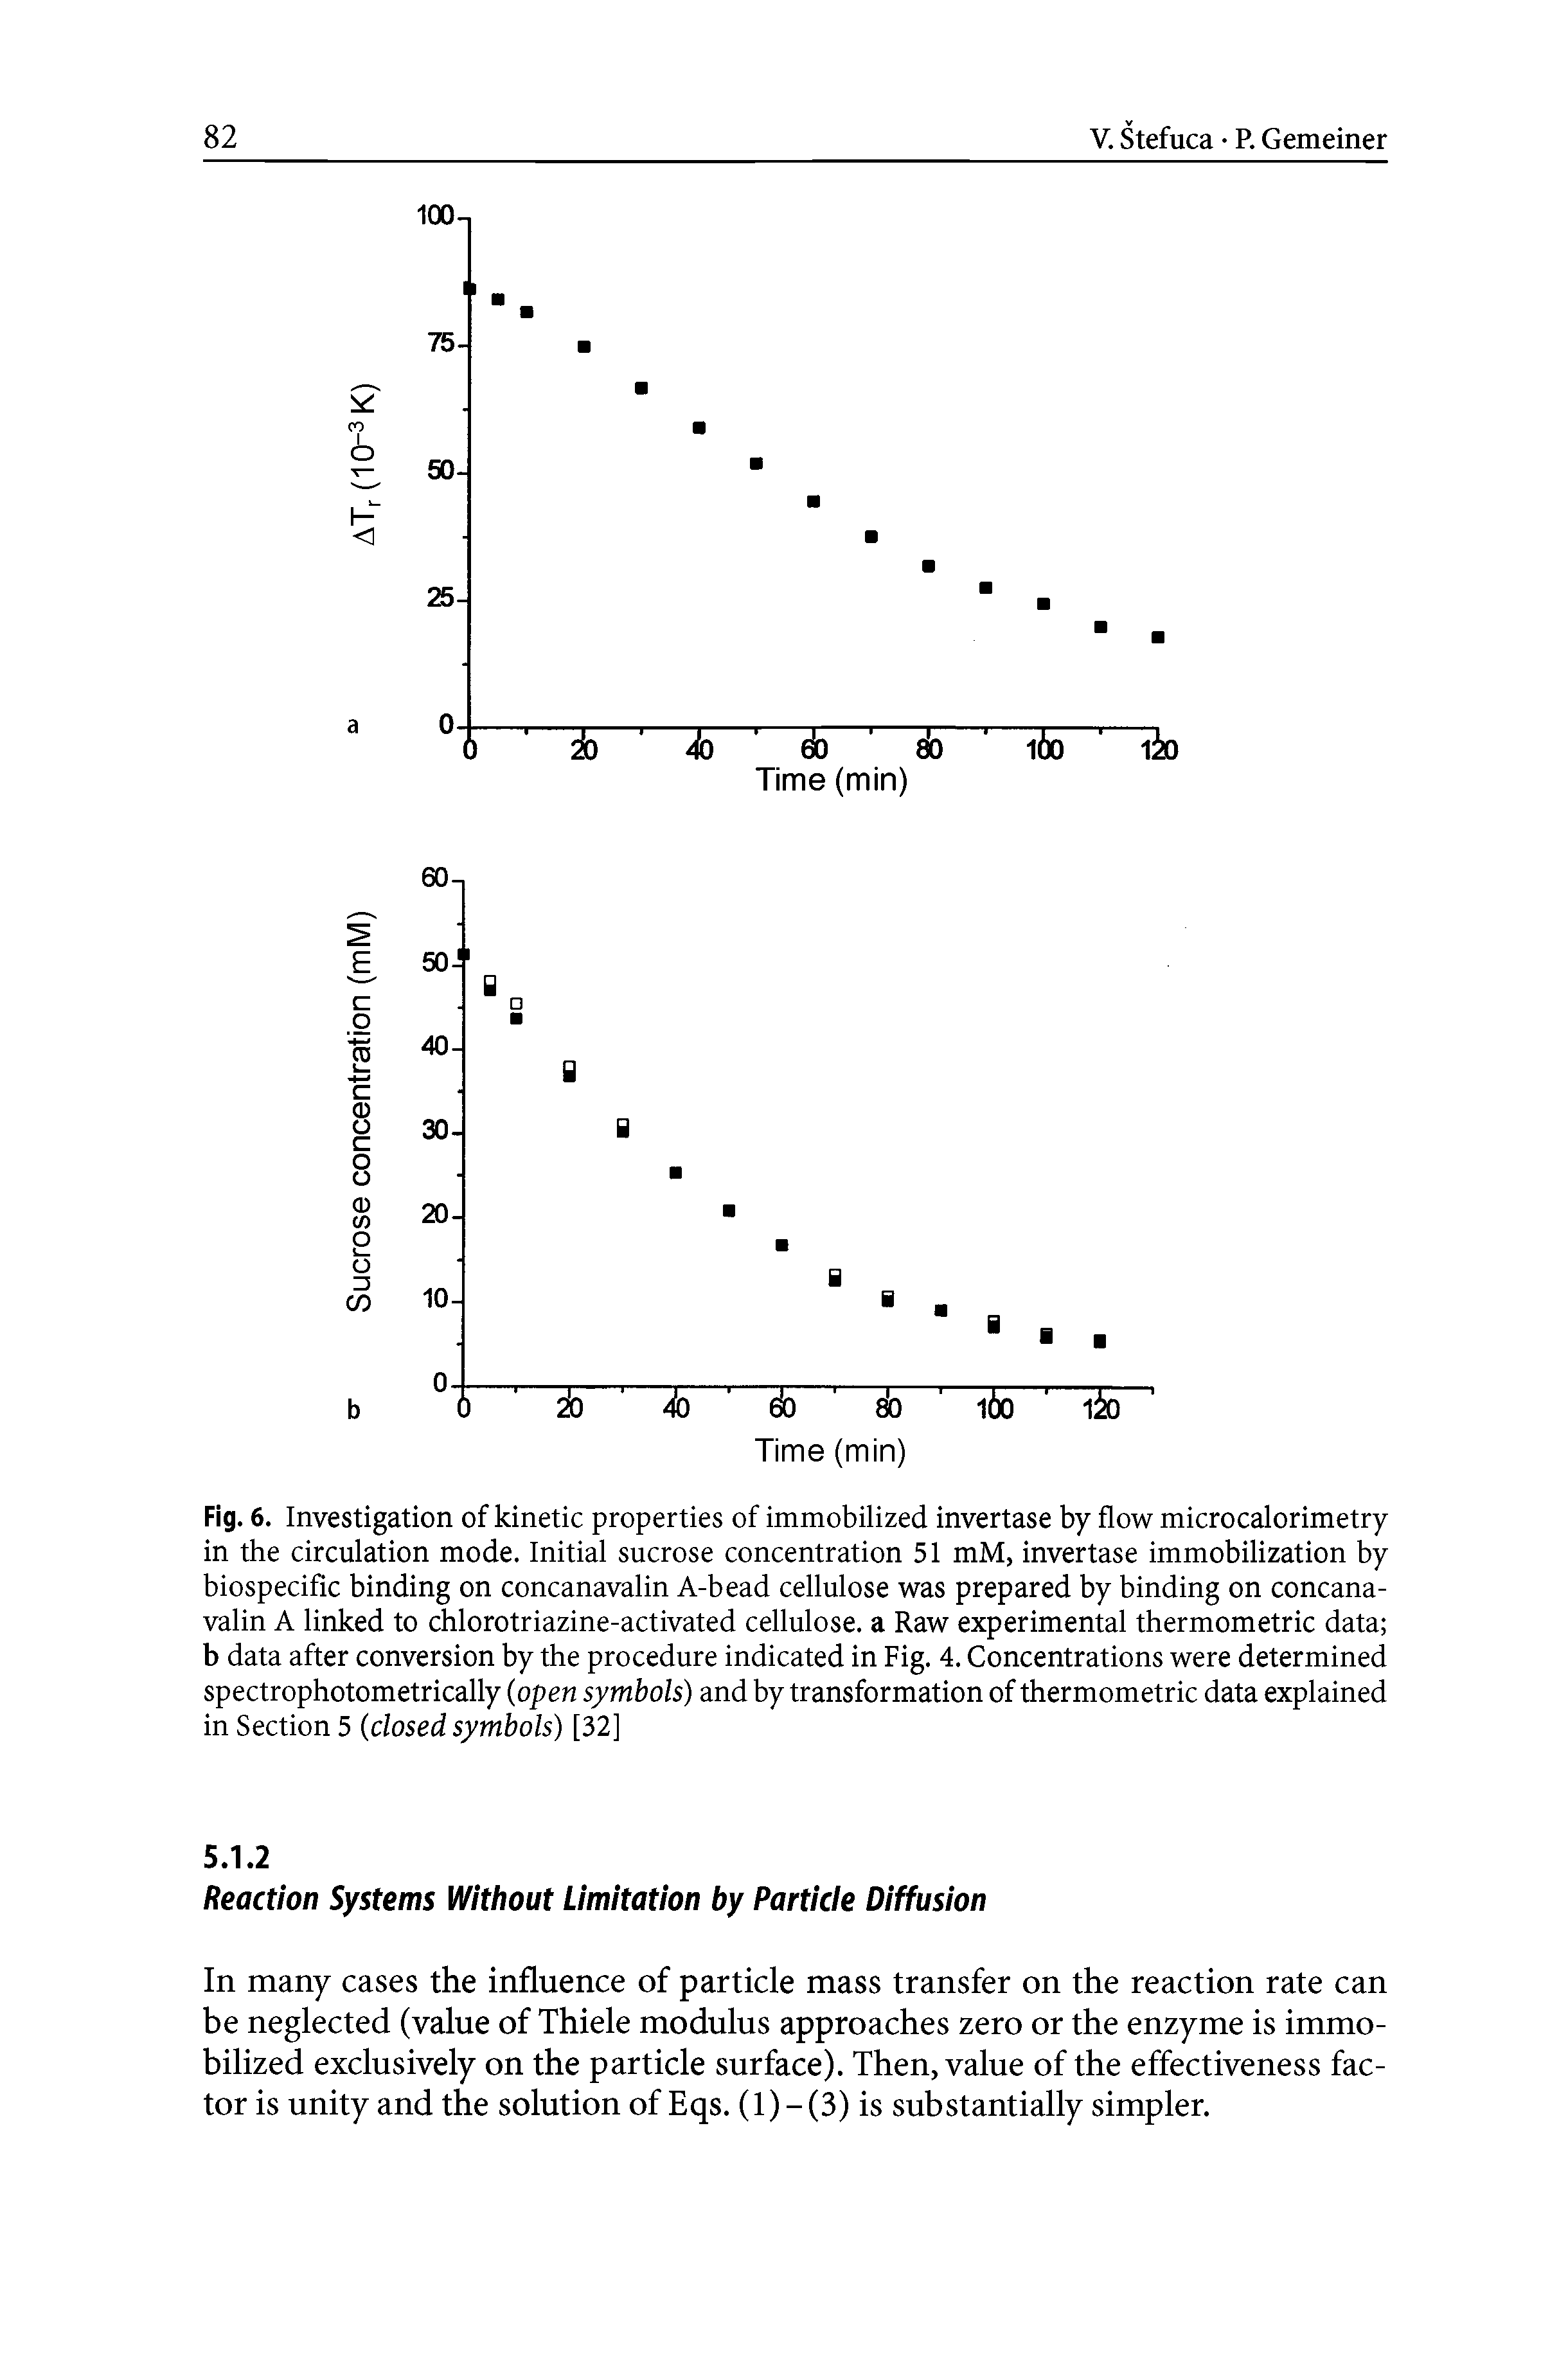 Fig. 6. Investigation of kinetic properties of immobilized invertase by flow microcalorimetry in the circulation mode. Initial sucrose concentration 51 mM, invertase immobilization by biospecific binding on concanavalin A-bead cellulose was prepared by binding on concana-valin A linked to chlorotriazine-activated cellulose, a Raw experimental thermometric data b data after conversion by the procedure indicated in Fig. 4. Concentrations were determined spectrophotometrically (open symbols) and by transformation of thermometric data explained in Section 5 (closed symbols) [32]...